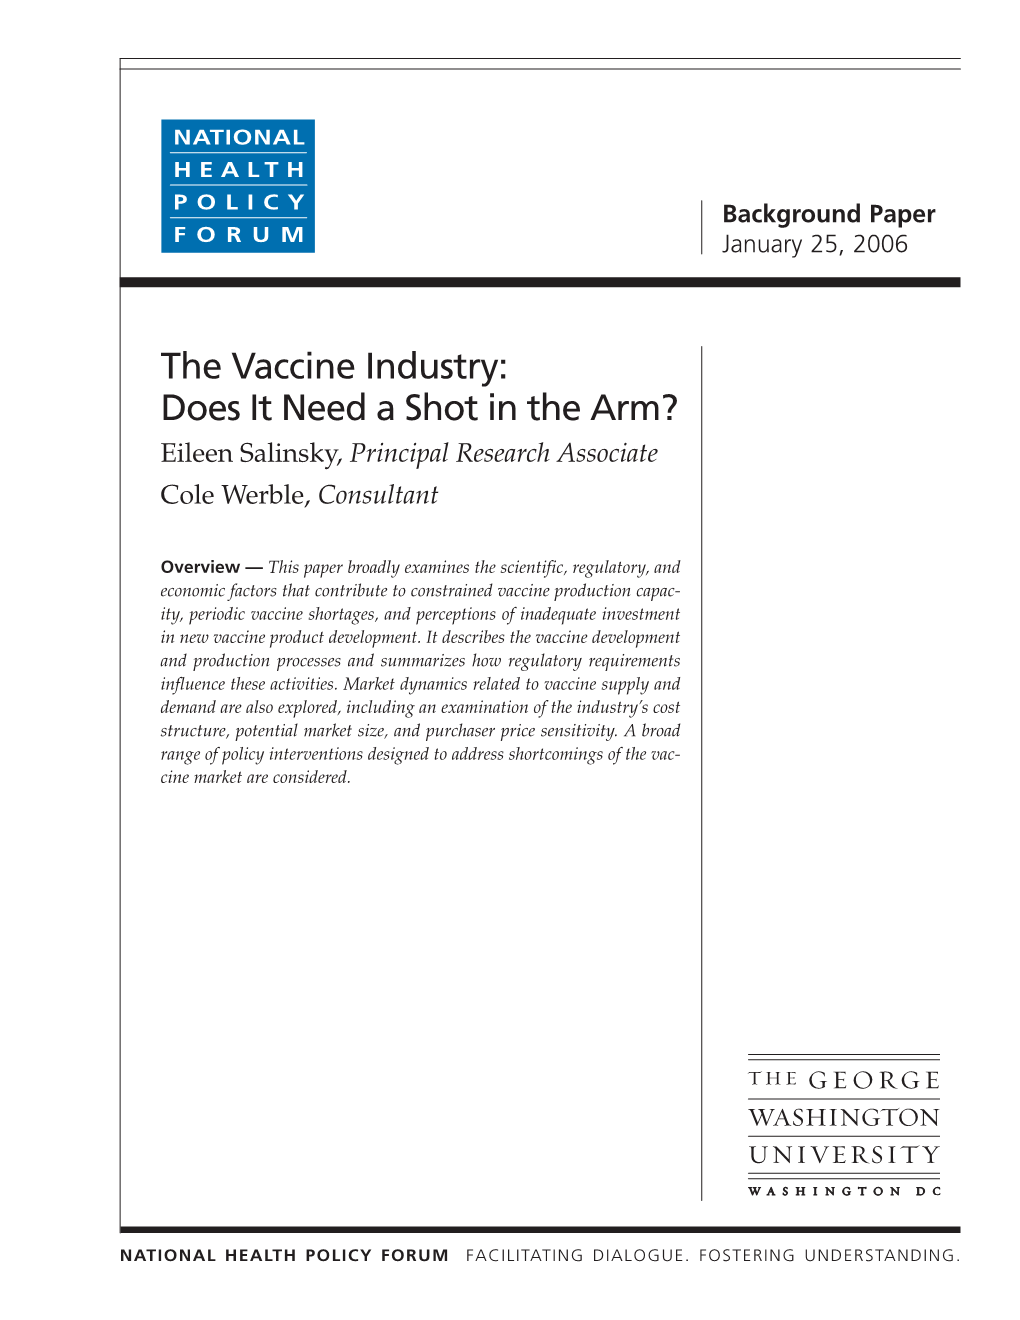 The Vaccine Industry: Does It Need a Shot in the Arm? Eileen Salinsky, Principal Research Associate Cole Werble, Consultant